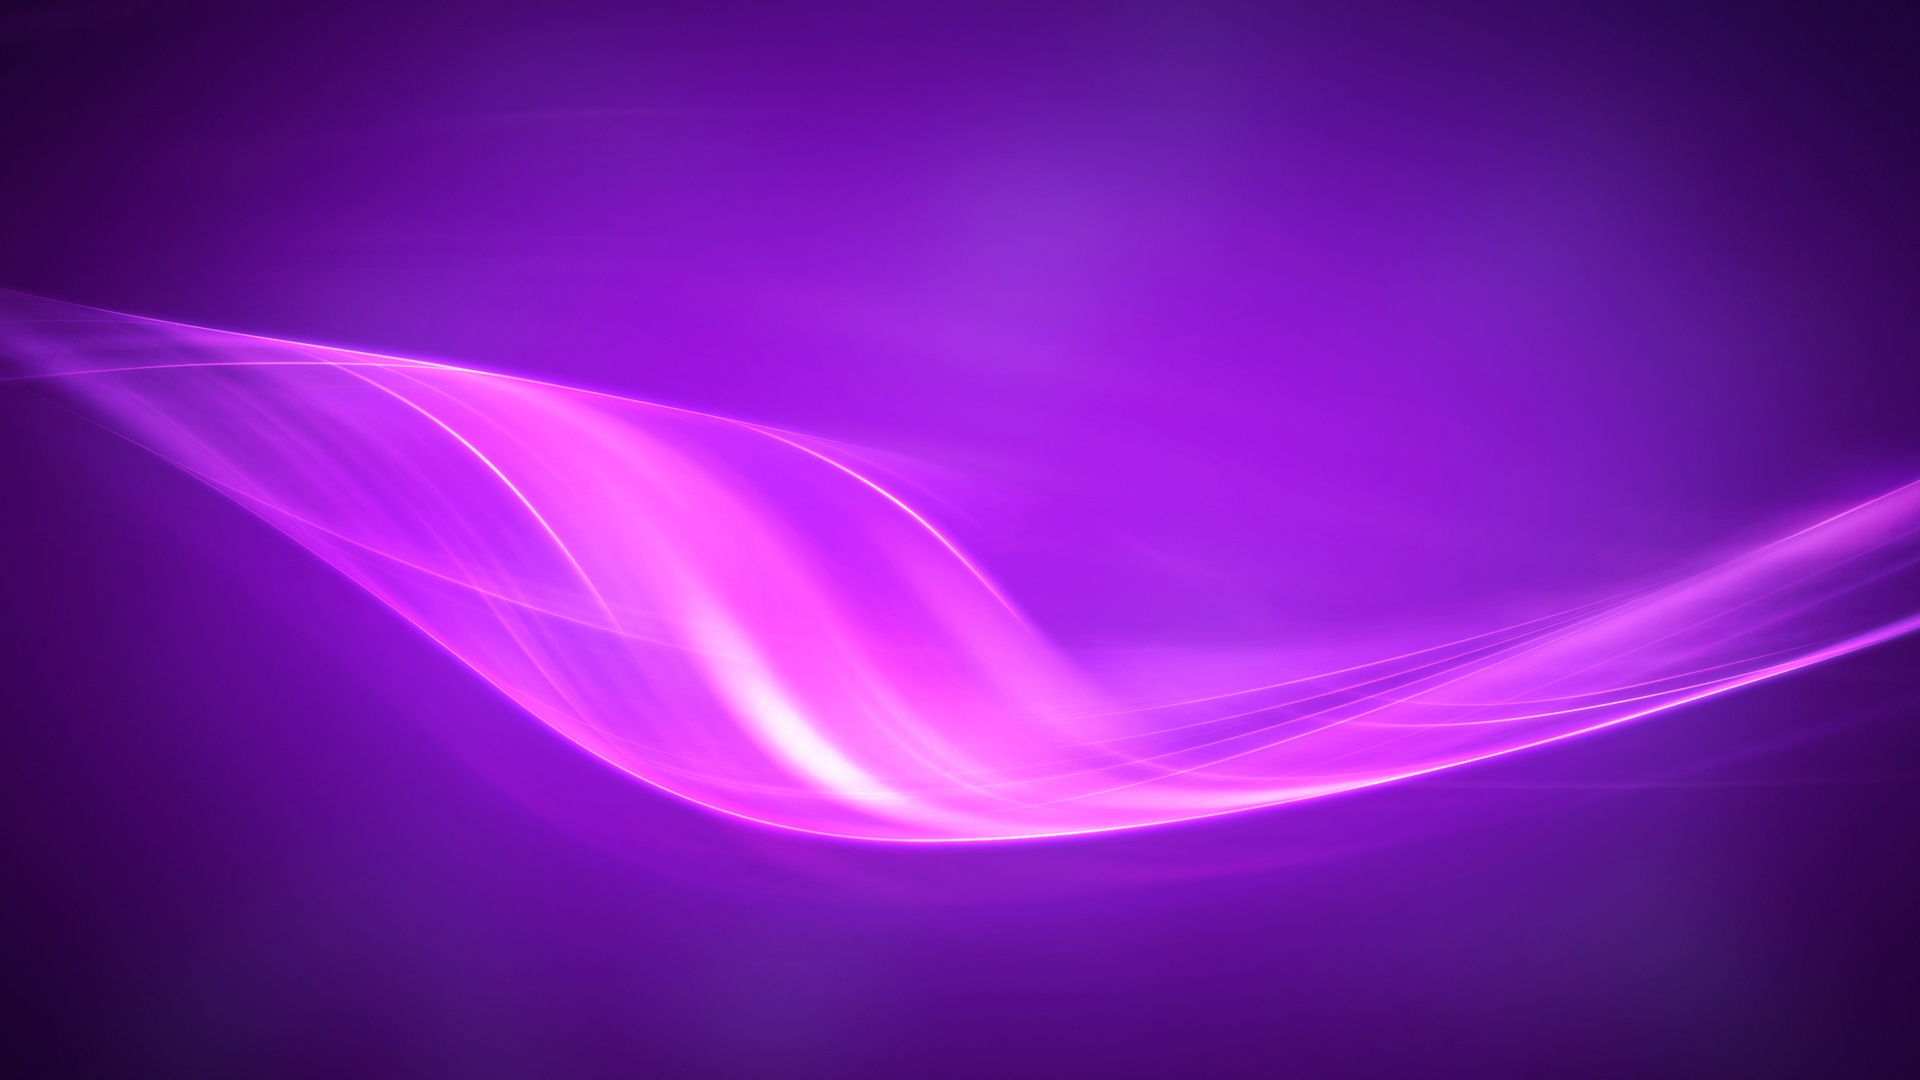  original paper lines violet wallpaper wallpapers abstract shine